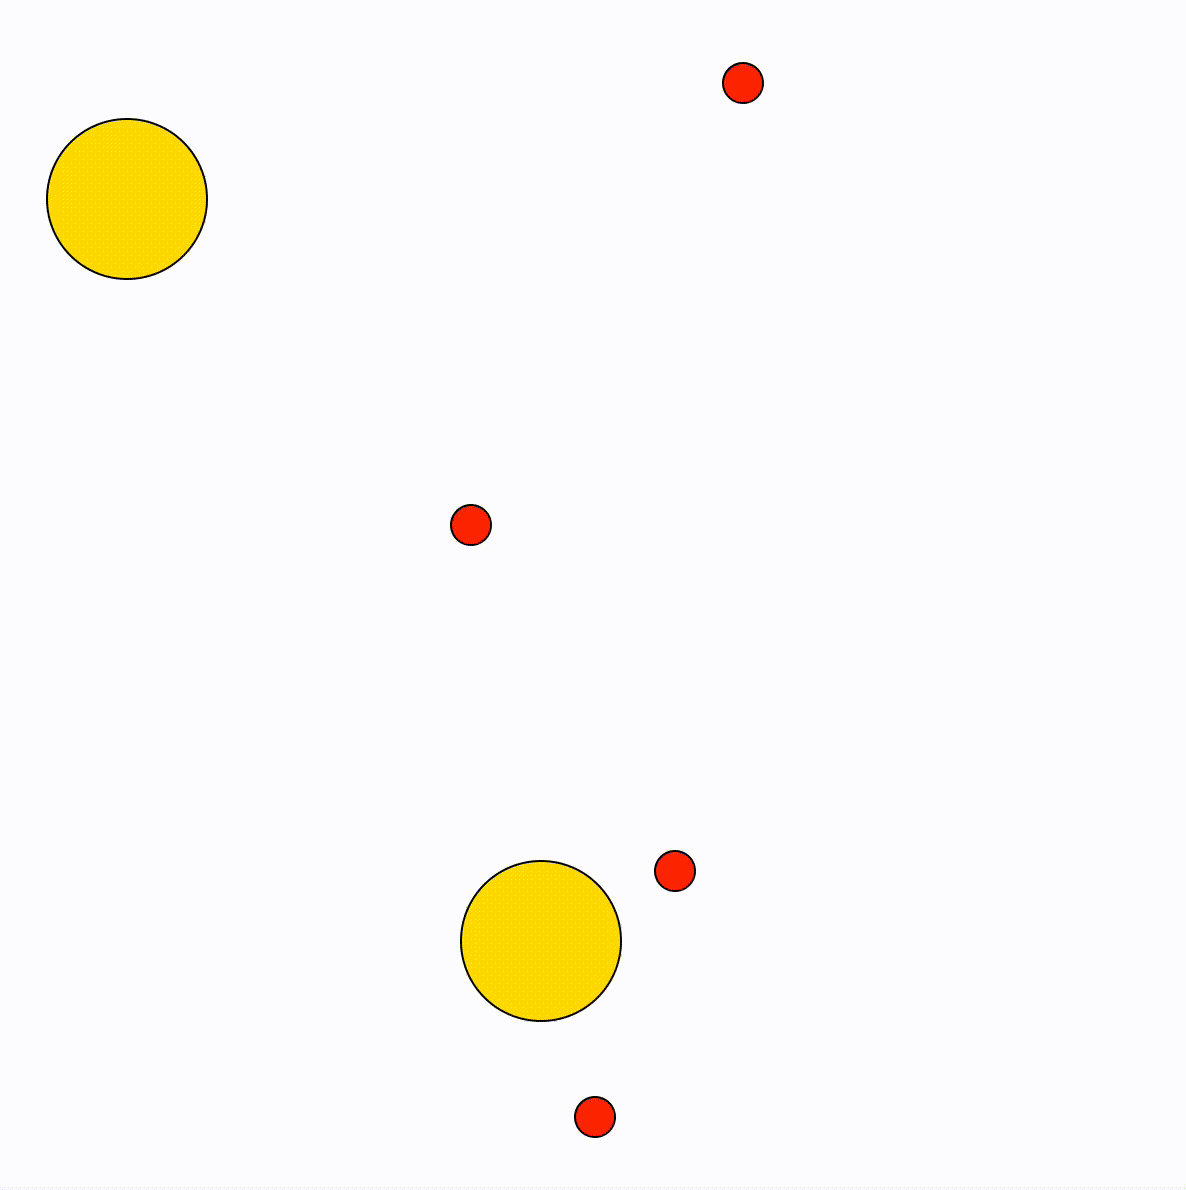 A number of red and yellow particles. The yellow particles are bigger than the red particles. They bounce around the window and collide with each other; the yellow particles move less when they collide than the red particles.